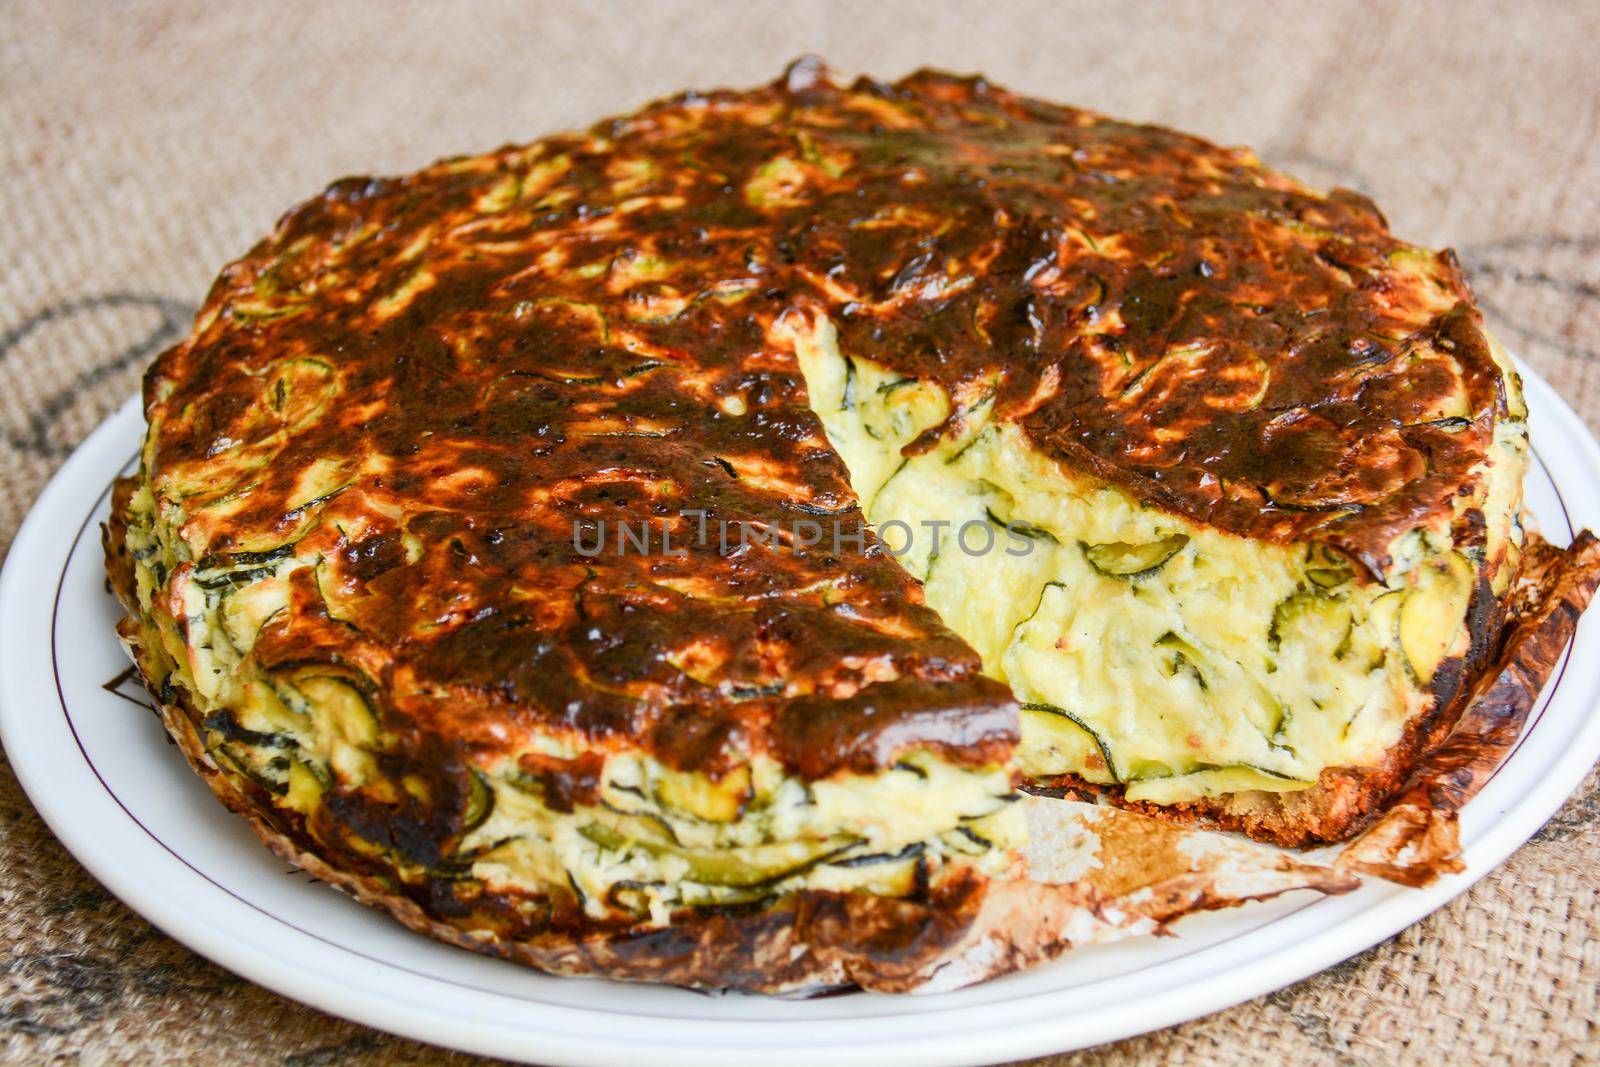 homemade savory cake with zucchini, goat cheese, ricotta, eggs and the wisdom of the grandmother